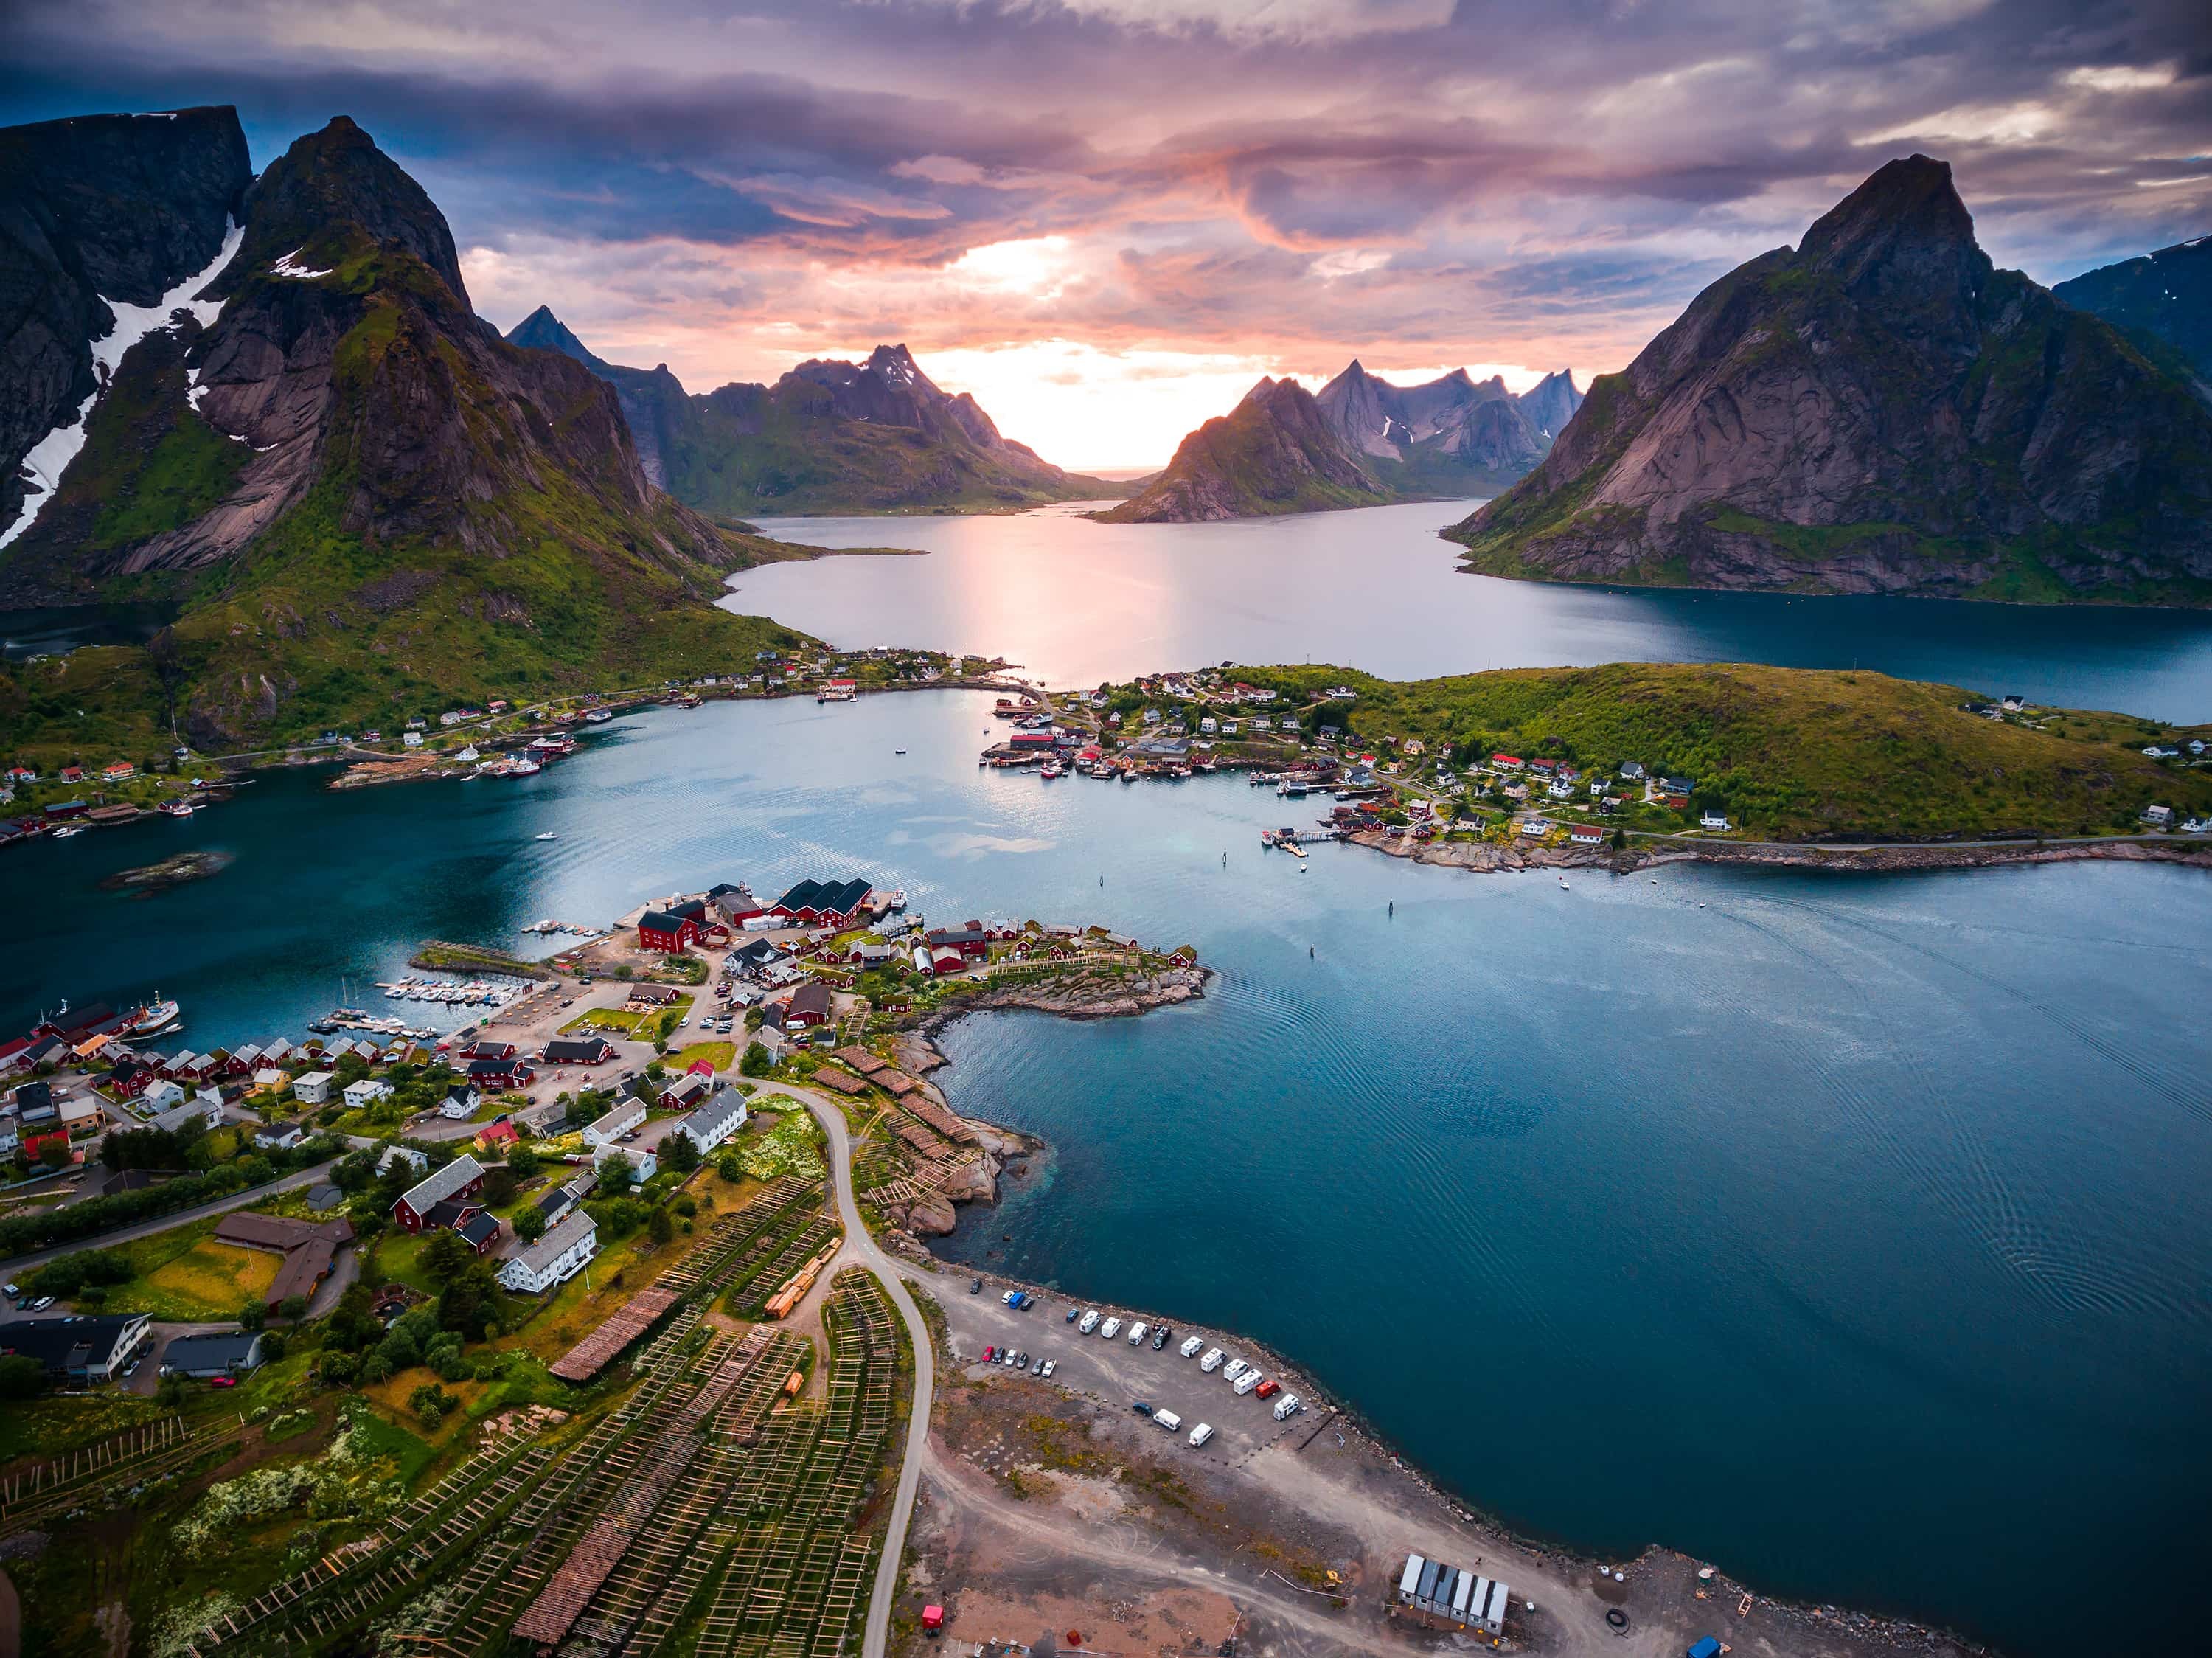 Northern Norway’s <a href="https://thenordicnomad.com/norway/nordland/" rel="noreferrer noopener">Nordland region</a> is home to some of the most dramatic landscapes in the country, filled with majestic glaciers, spectacular fjords and breathtaking coastlines. Set to open in 2024, the luxurious <a href="https://www.sixsenses.com/en/new-openings/svart" rel="noreferrer noopener">Six Senses Svart</a> located just above the Arctic Circle, will be the world’s first energy-positive hotel, running entirely off-grid. Also in the region is the town of Bodø, which is one of three <a href="https://culture.ec.europa.eu/policies/culture-in-cities-and-regions/designated-capitals-of-culture" rel="noreferrer noopener">European Capitals of Culture for 2024</a>, known for its annual Parken musical festival, street art, and boutique shops.